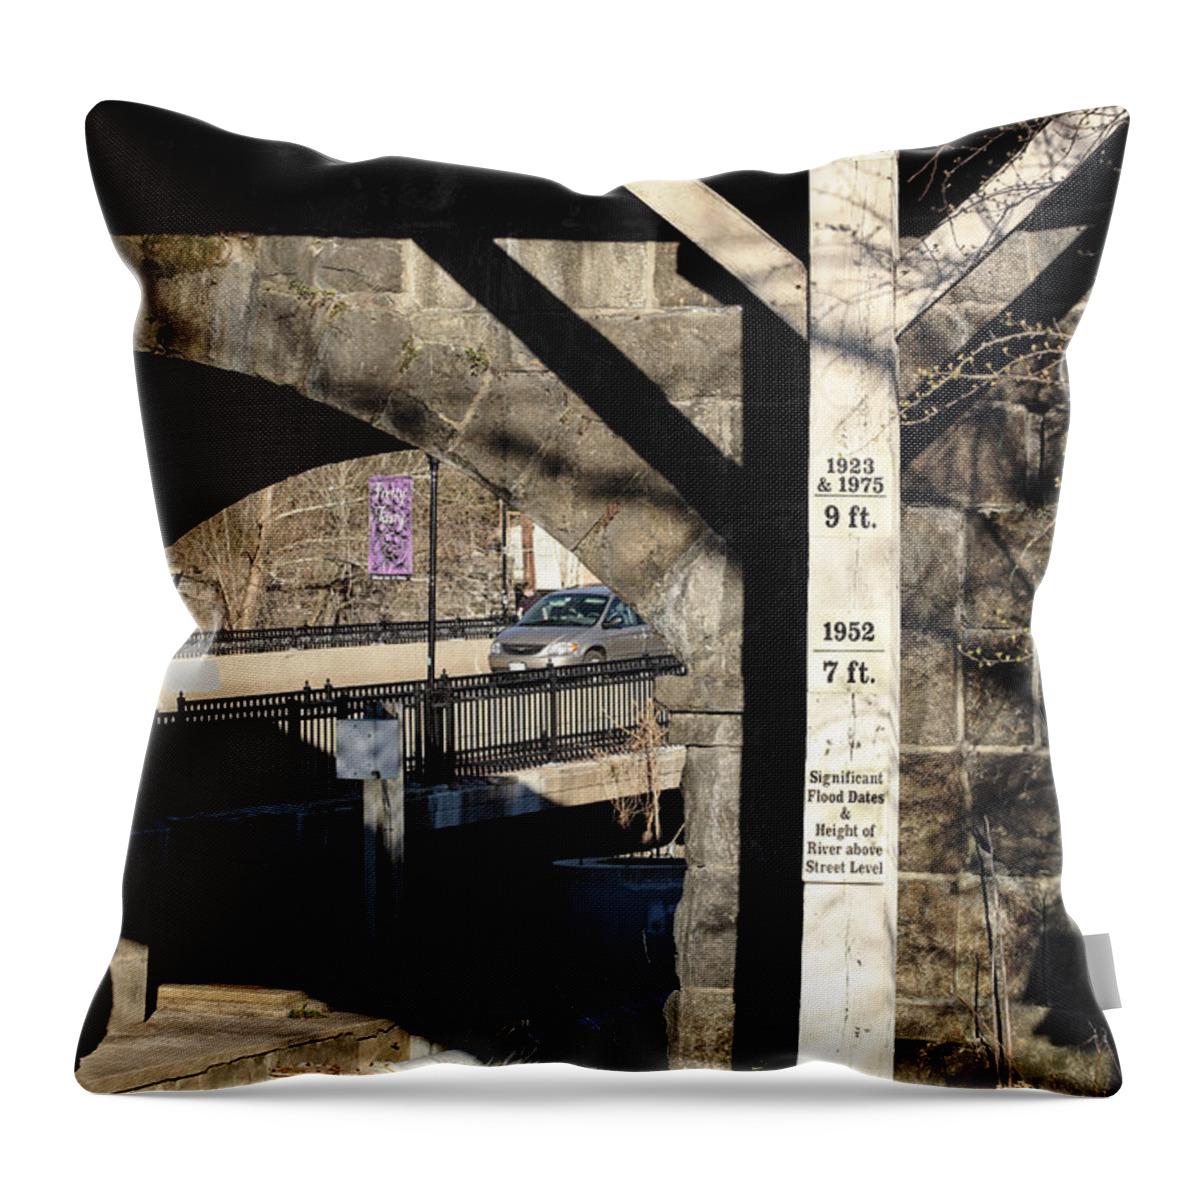 Ellicott City Throw Pillow featuring the photograph Flood height sign at Ellicott City Maryland by William Kuta